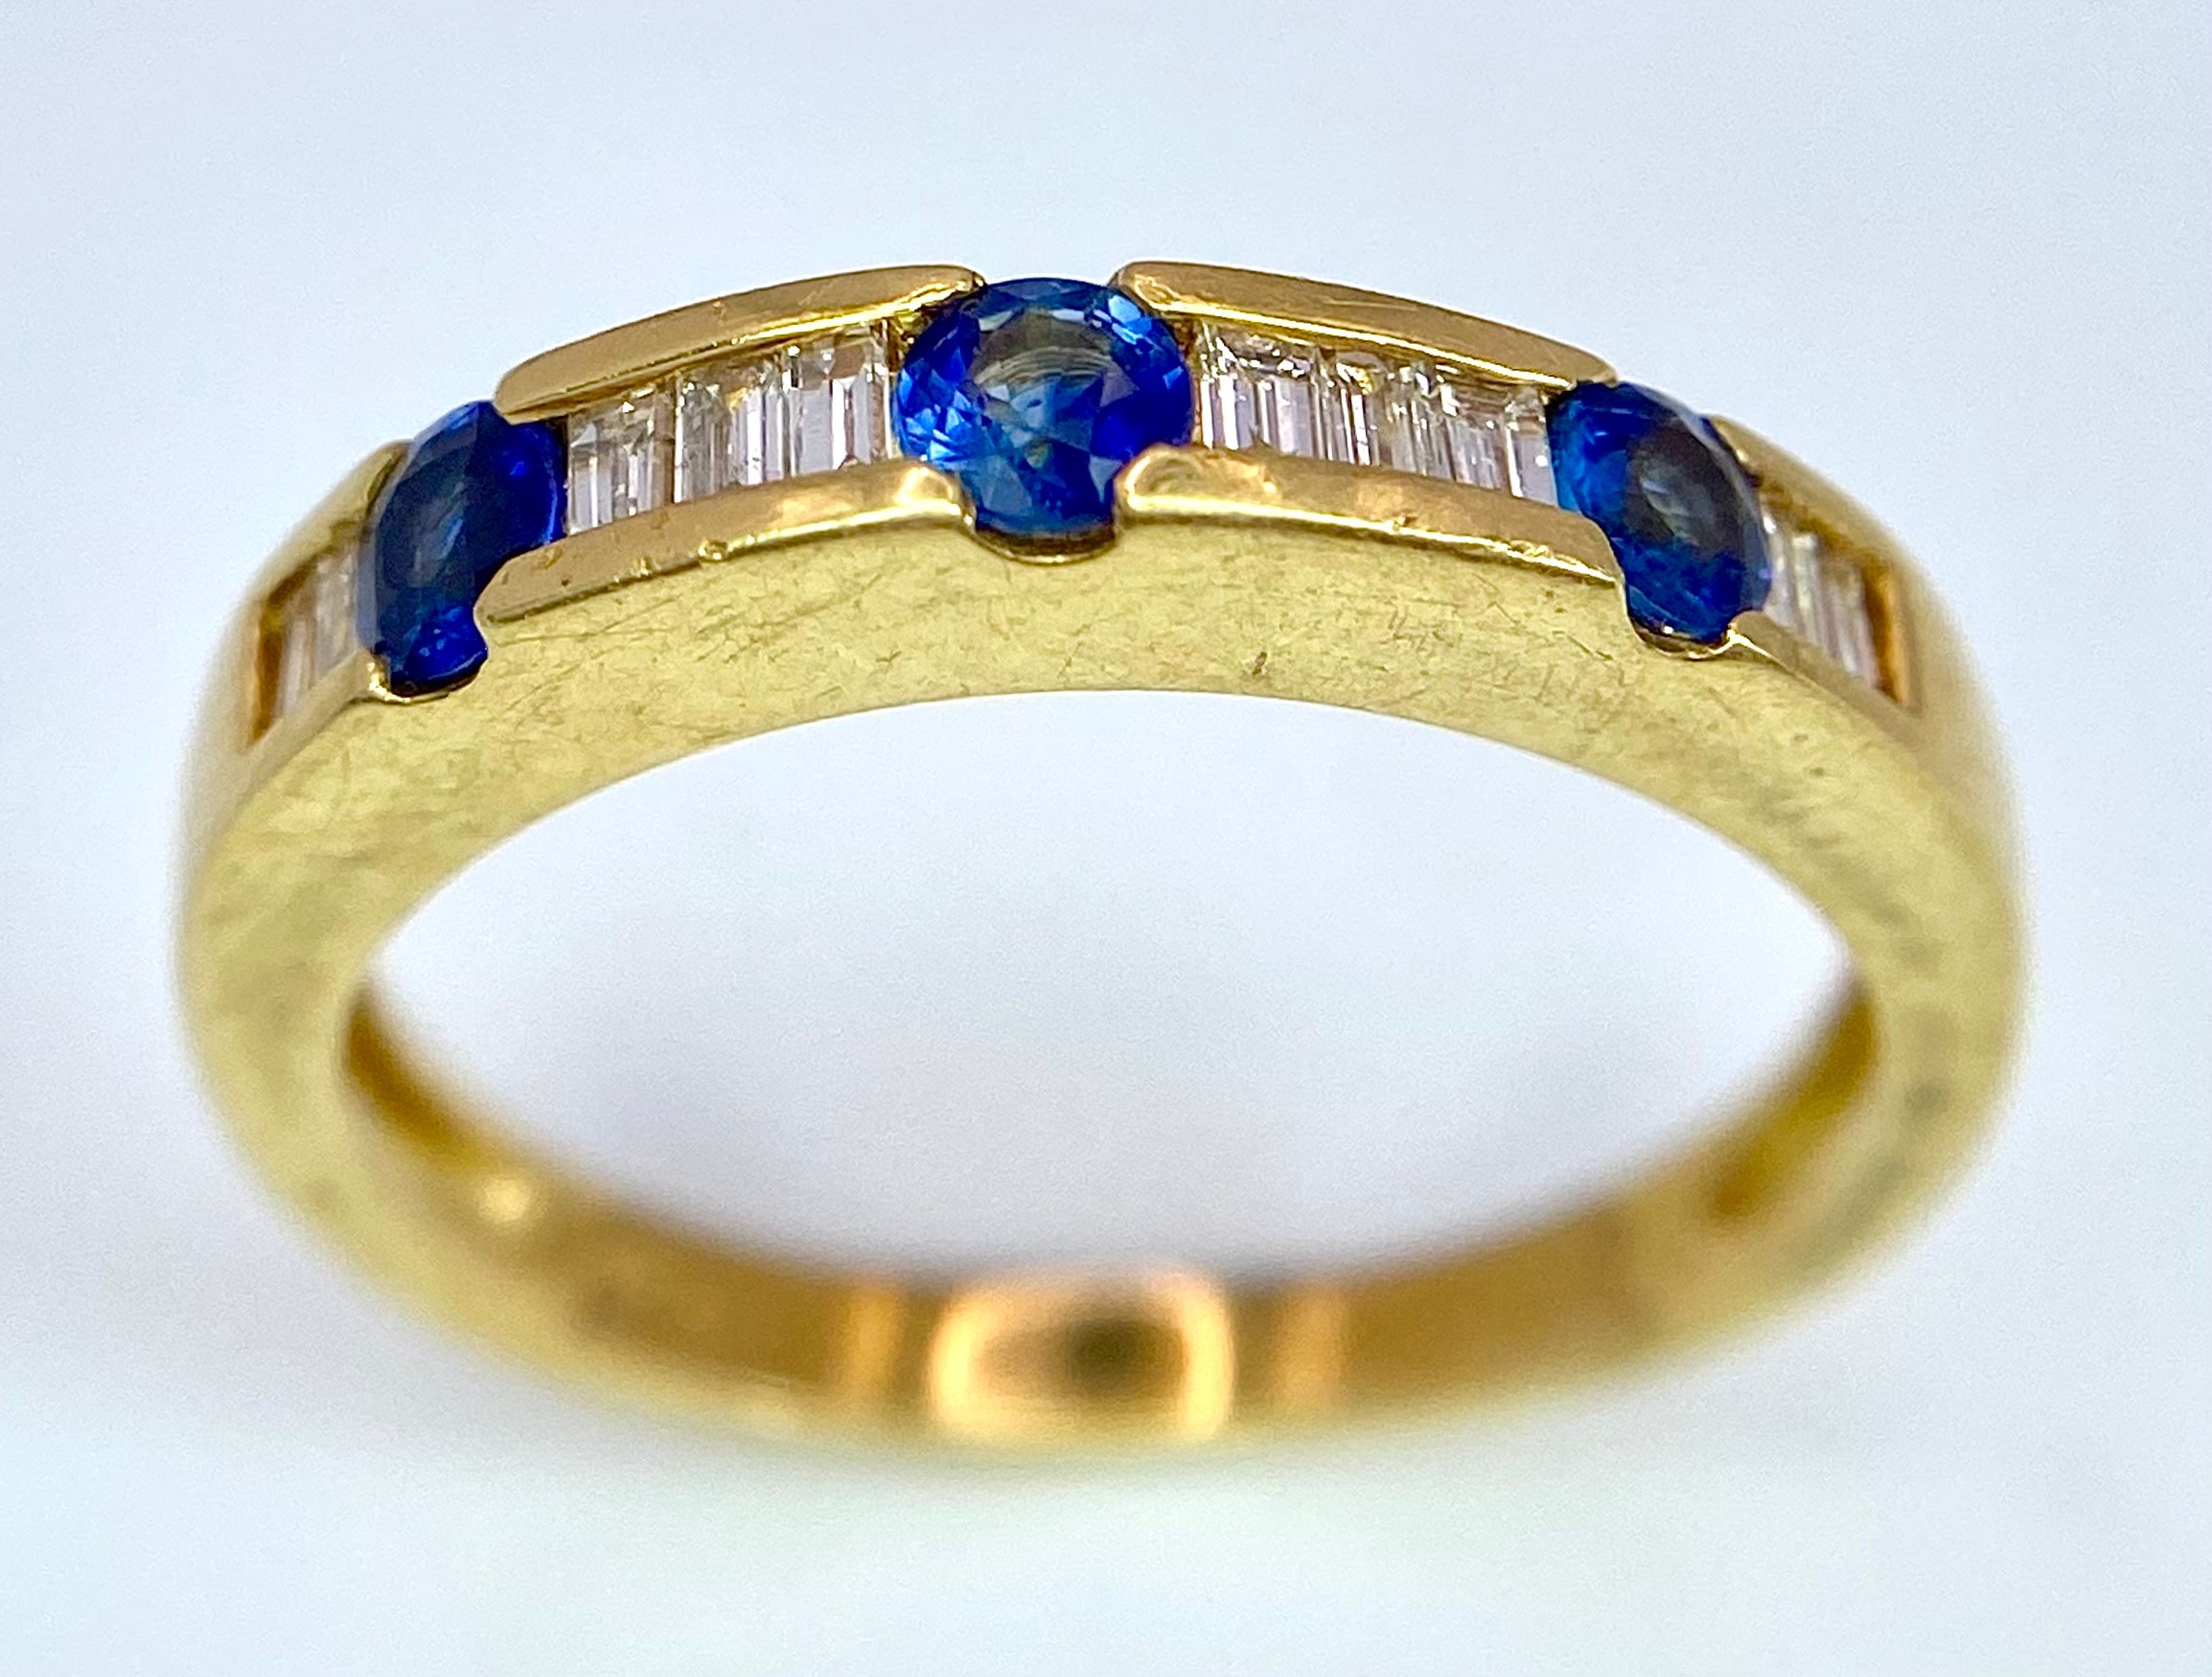 AN 18K YELLOW GOLD DIAMOND & SAPPHIRE BAND RING. 0.20ctw, size O, 3.6g total weight. Ref: SC 9037 - Image 3 of 7